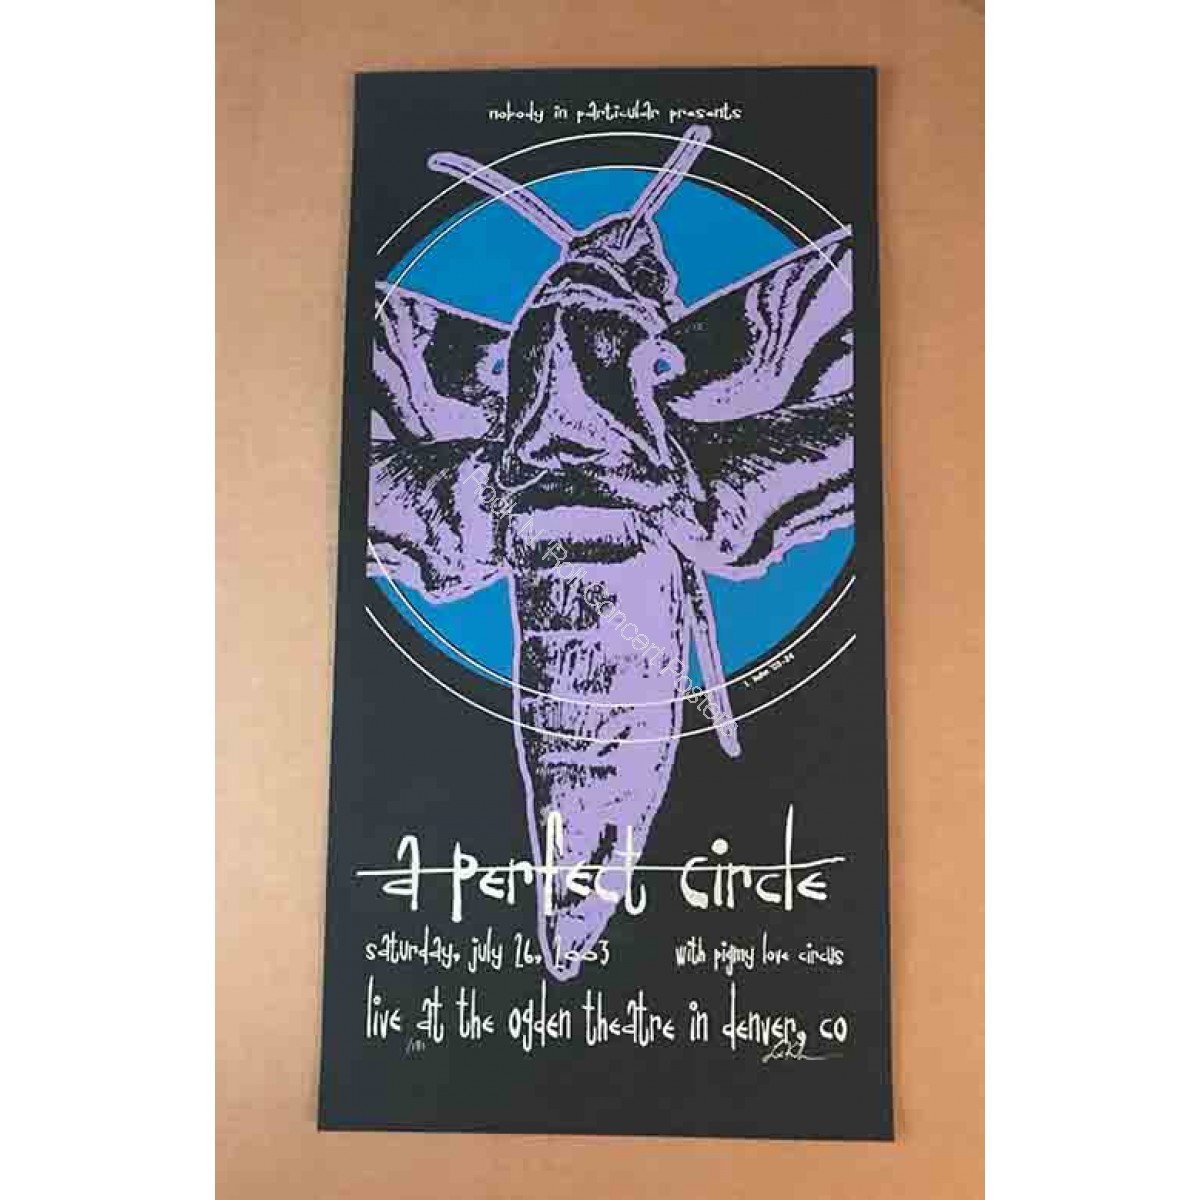 A Perfect Circle at The Ogden Theatre July 26th 2003 S/N Screen Print Poster